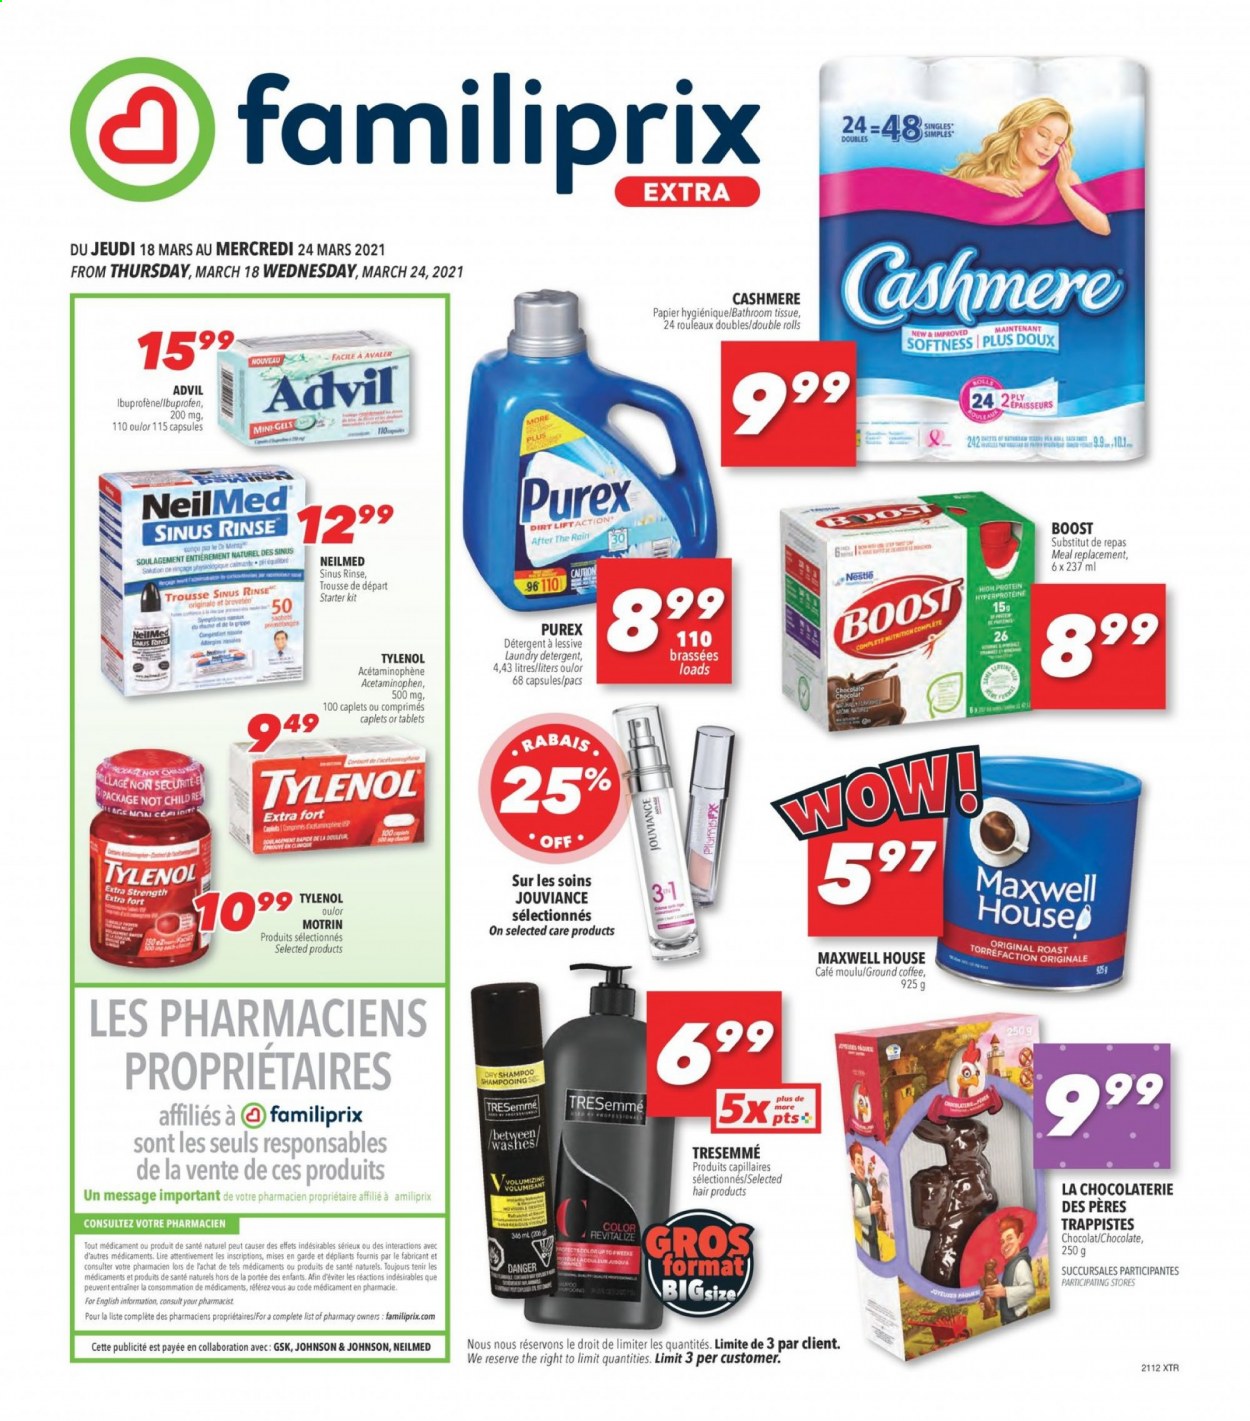 thumbnail - Familiprix Extra Flyer - March 18, 2021 - March 24, 2021 - Sales products - chocolate, Mars, Boost, Maxwell House, coffee, ground coffee, Johnson's, bath tissue, laundry detergent, Purex, TRESemmé, Tylenol, Advil Rapid, Motrin, Nestlé, shampoo. Page 1.